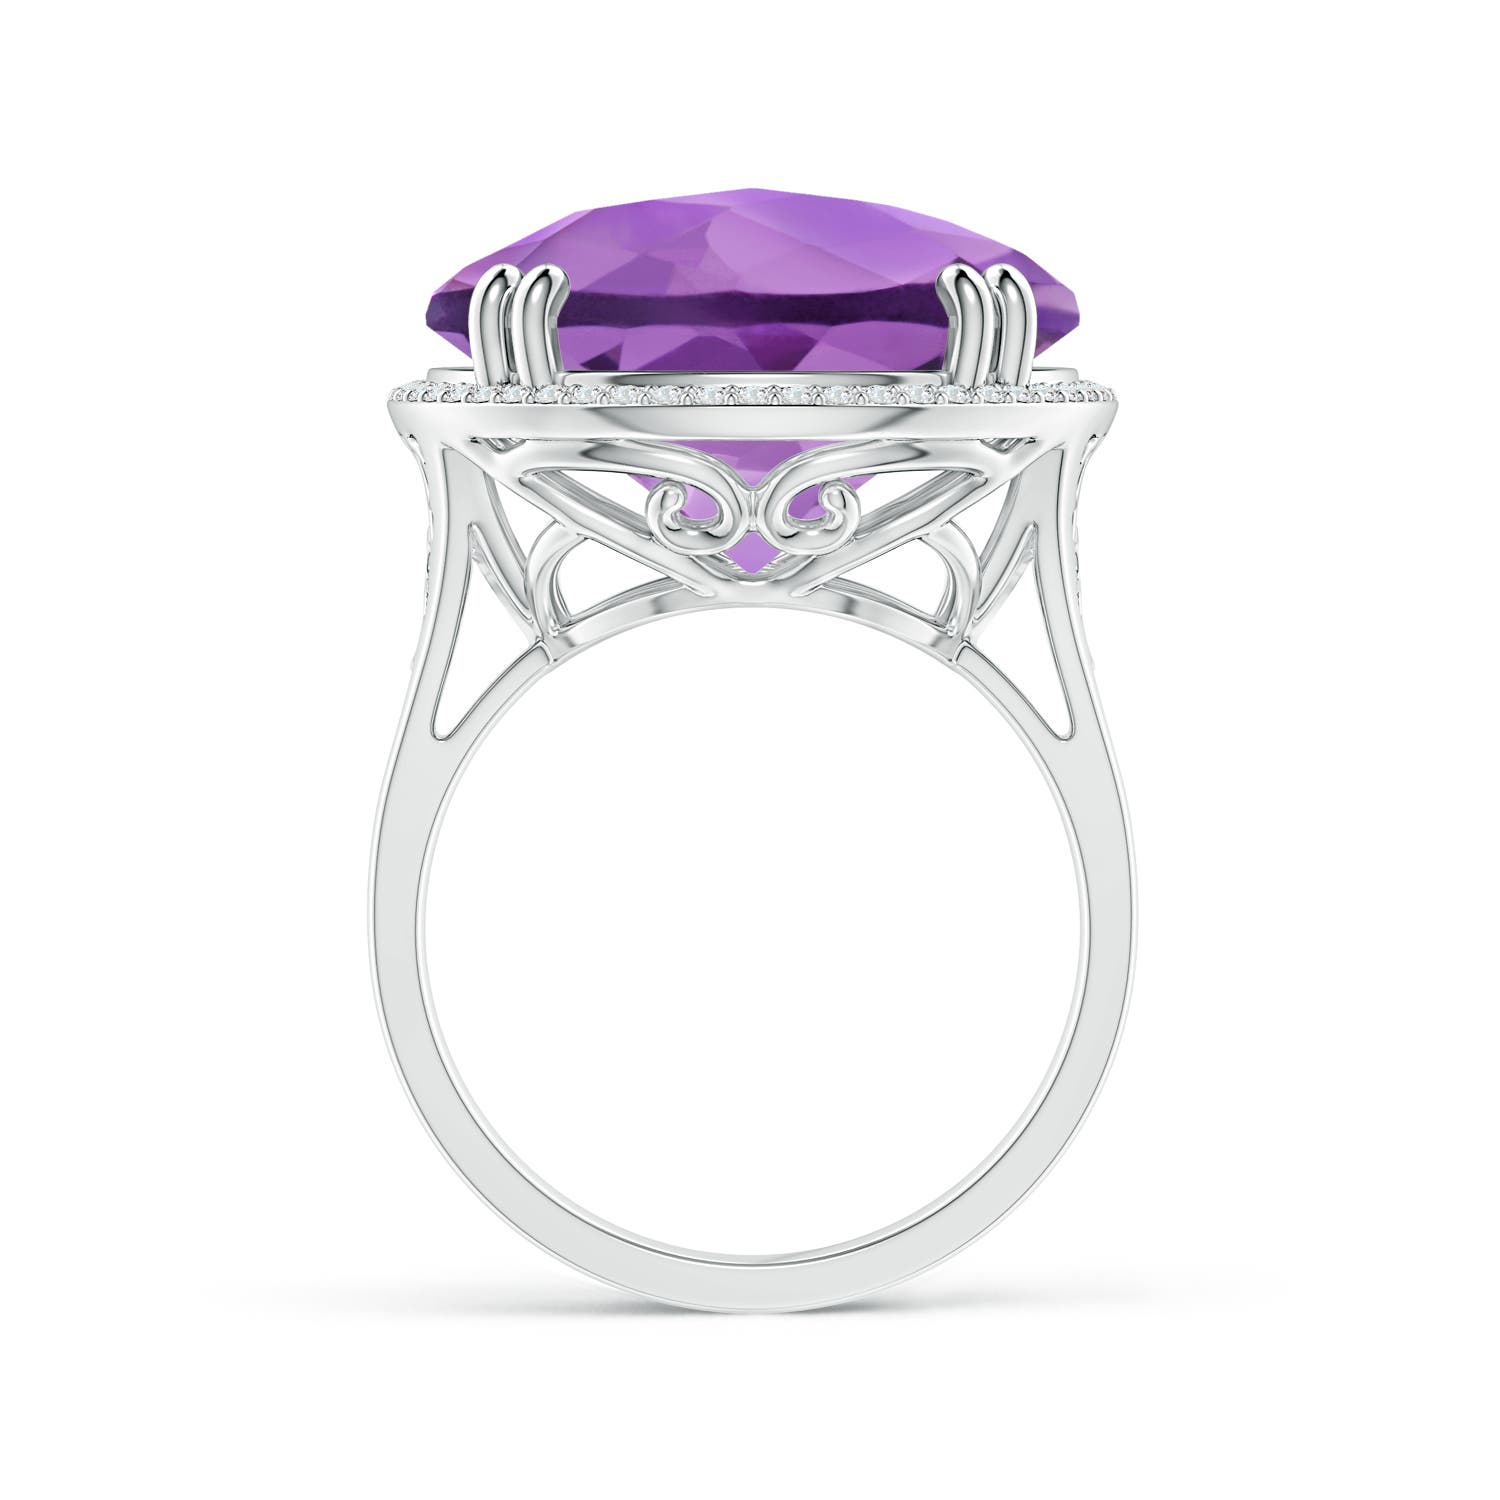 A - Amethyst / 18.23 CT / 14 KT White Gold